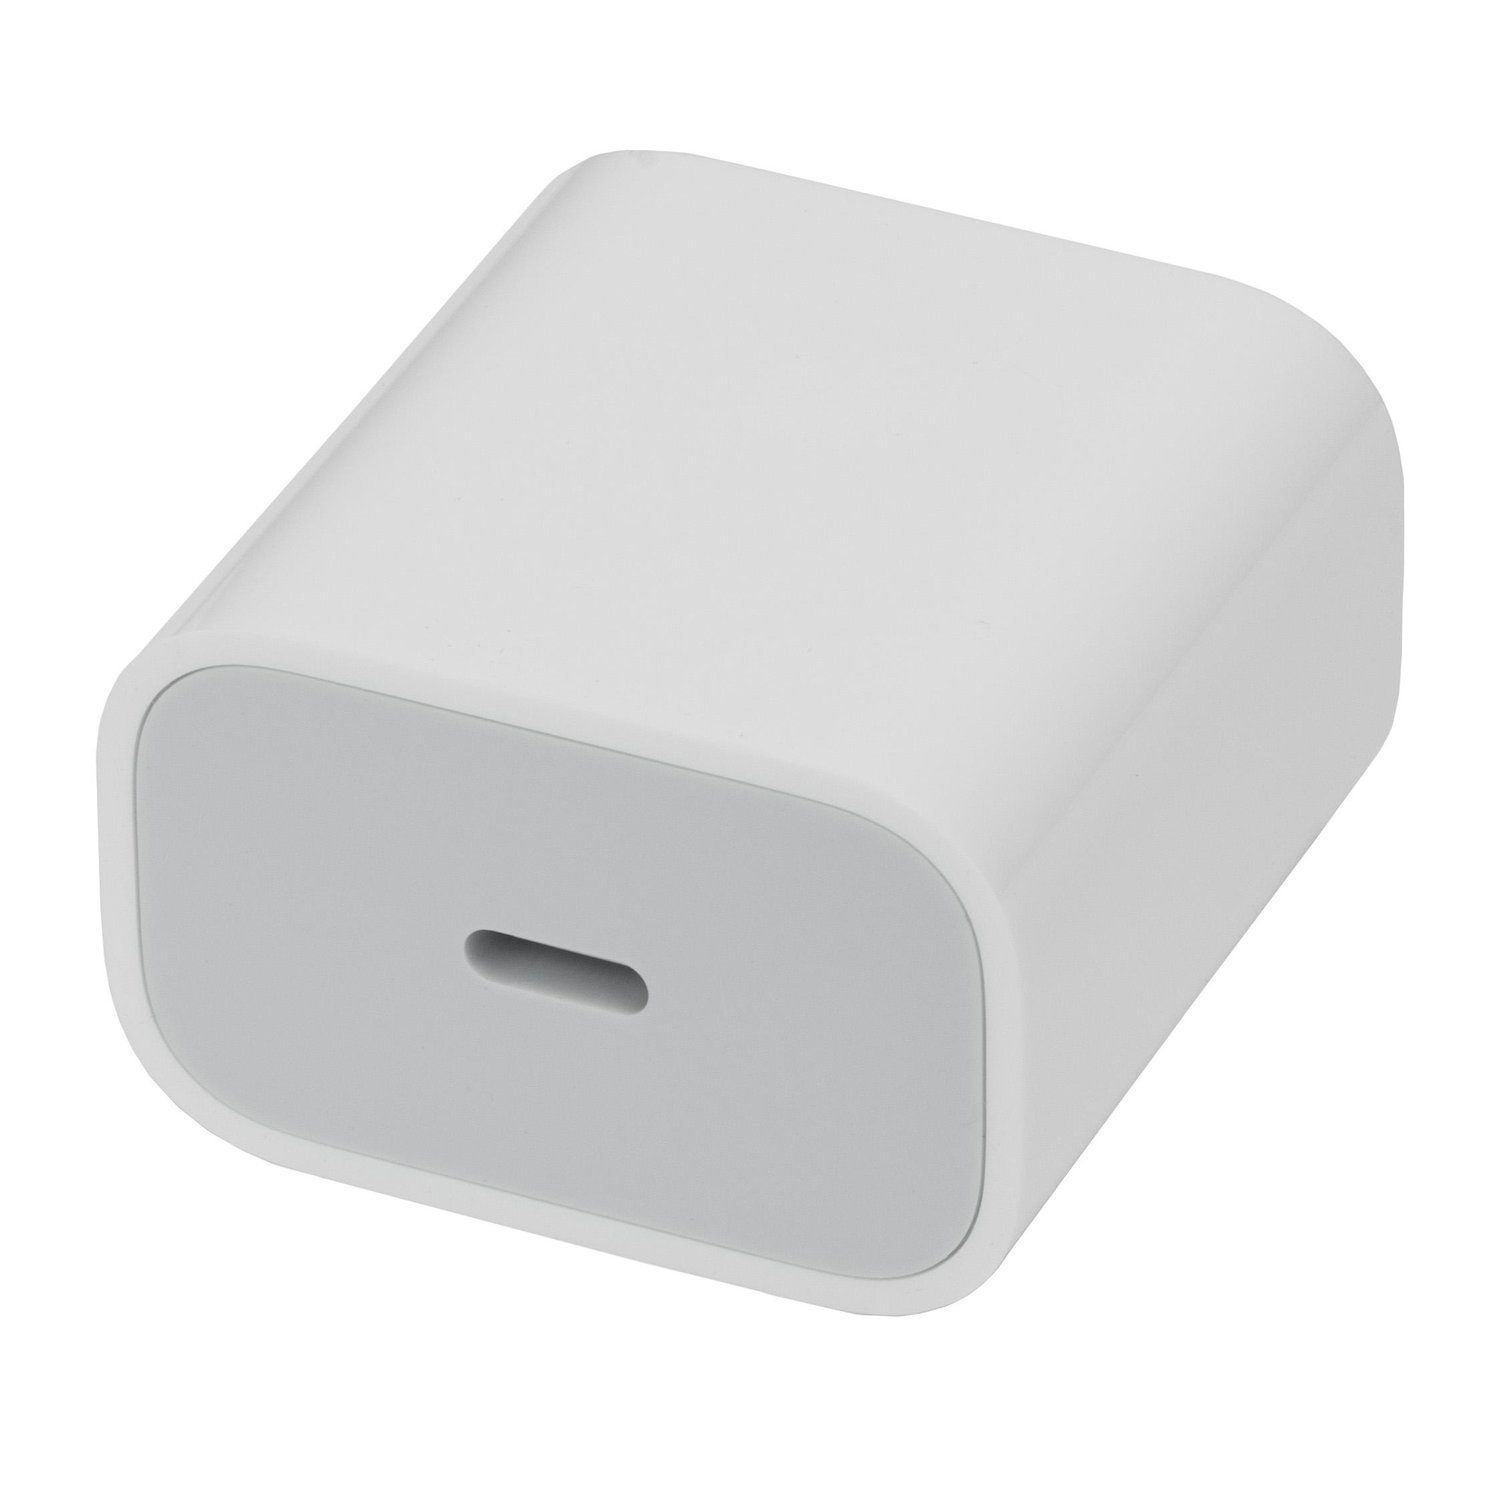 Genuine APPLE MacBook Pro 61W USB-C Power Adapter Charger Used